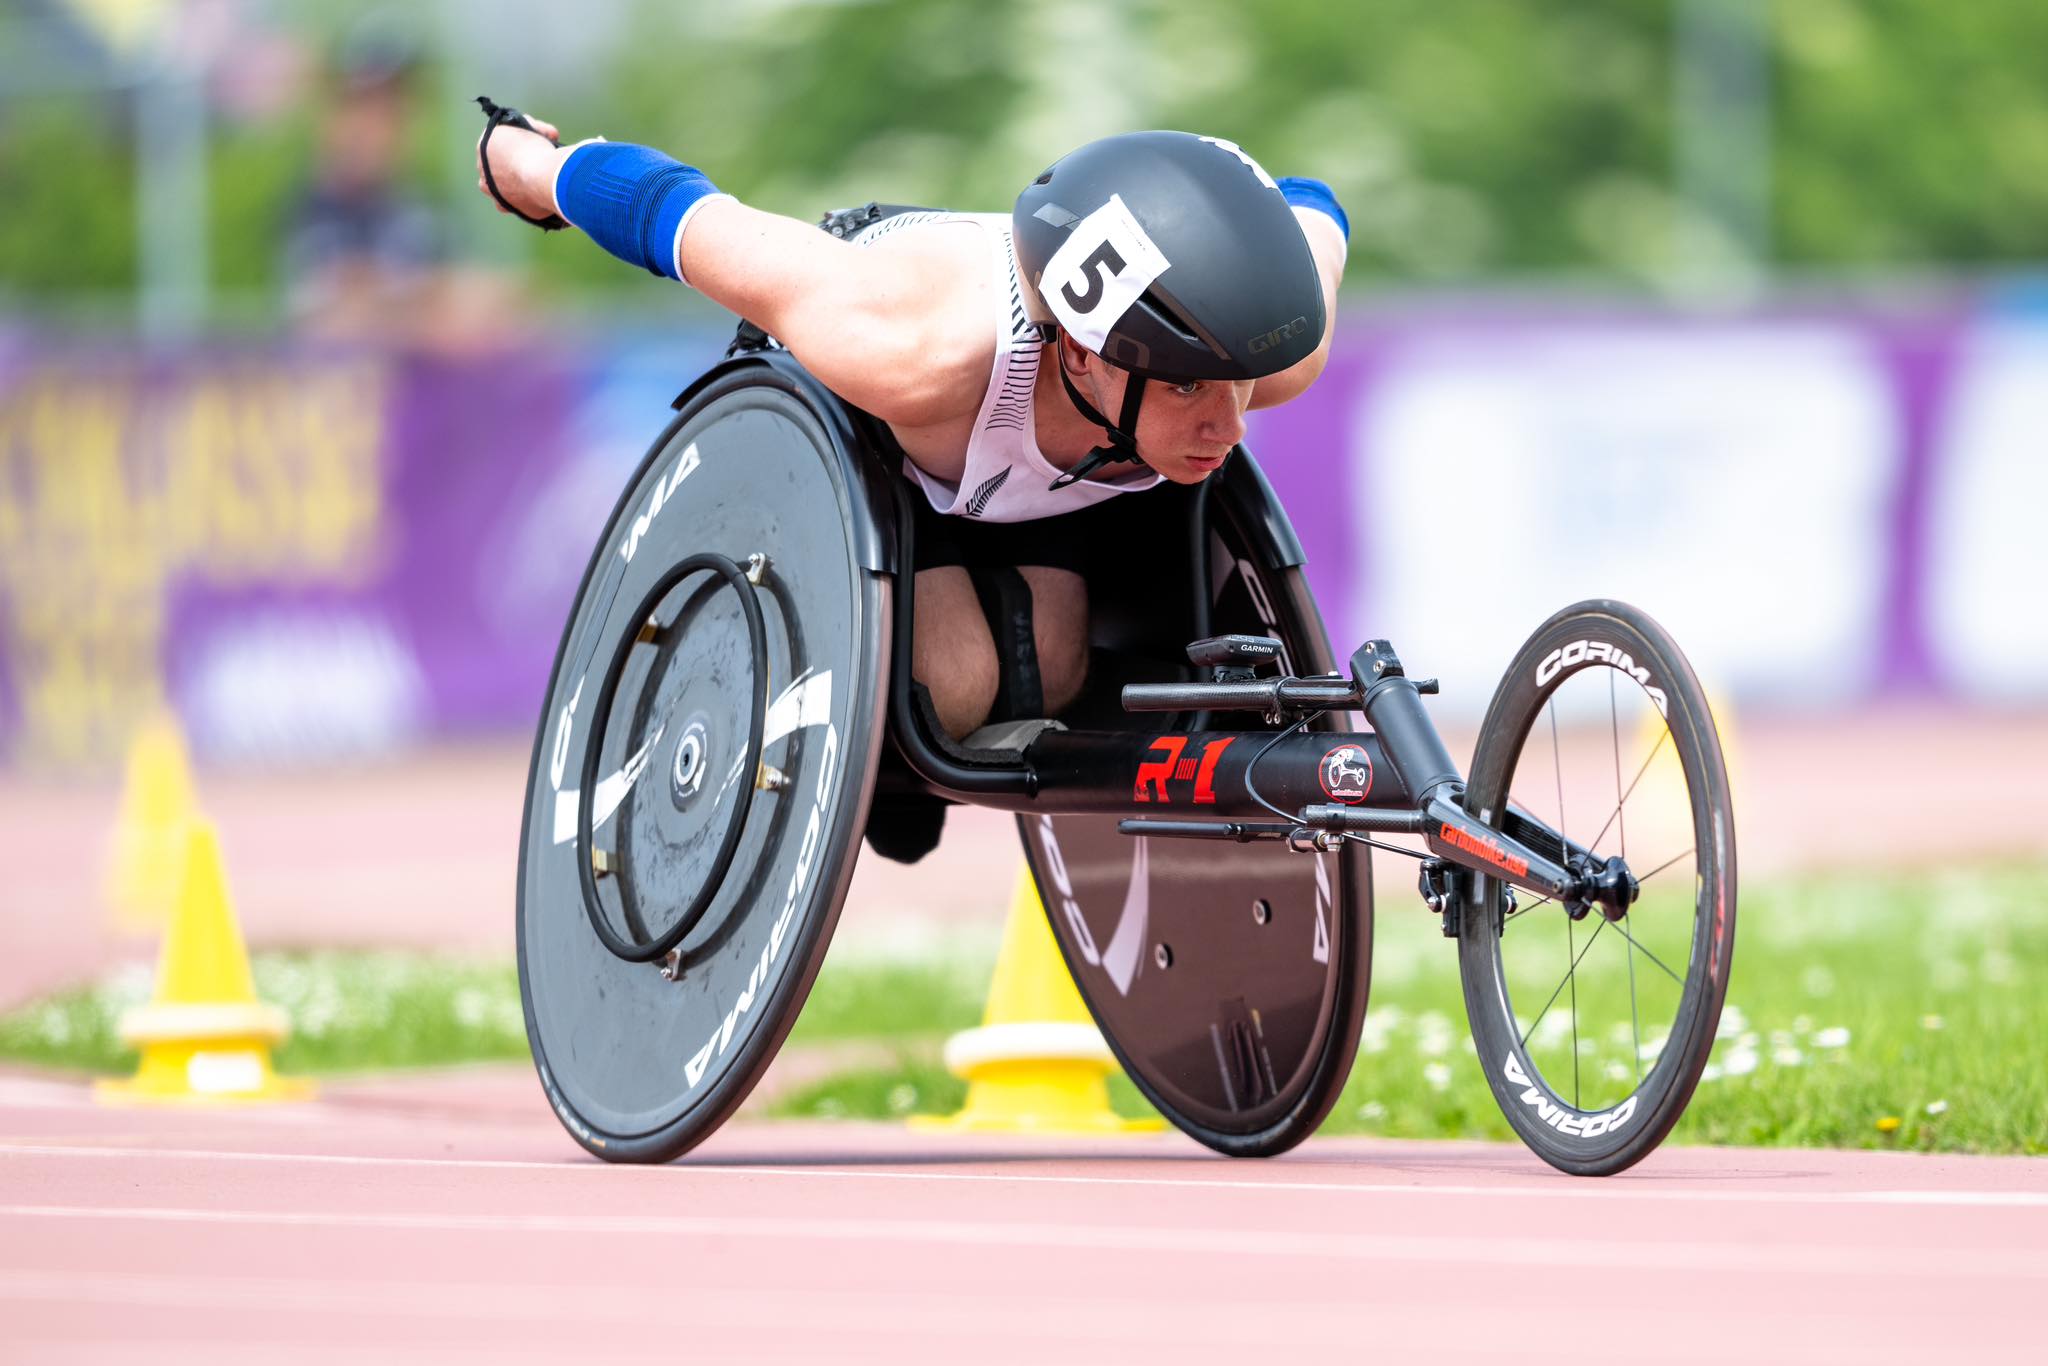 A photo of Paralympian, Jaden Movold during a track race in his wheelchair